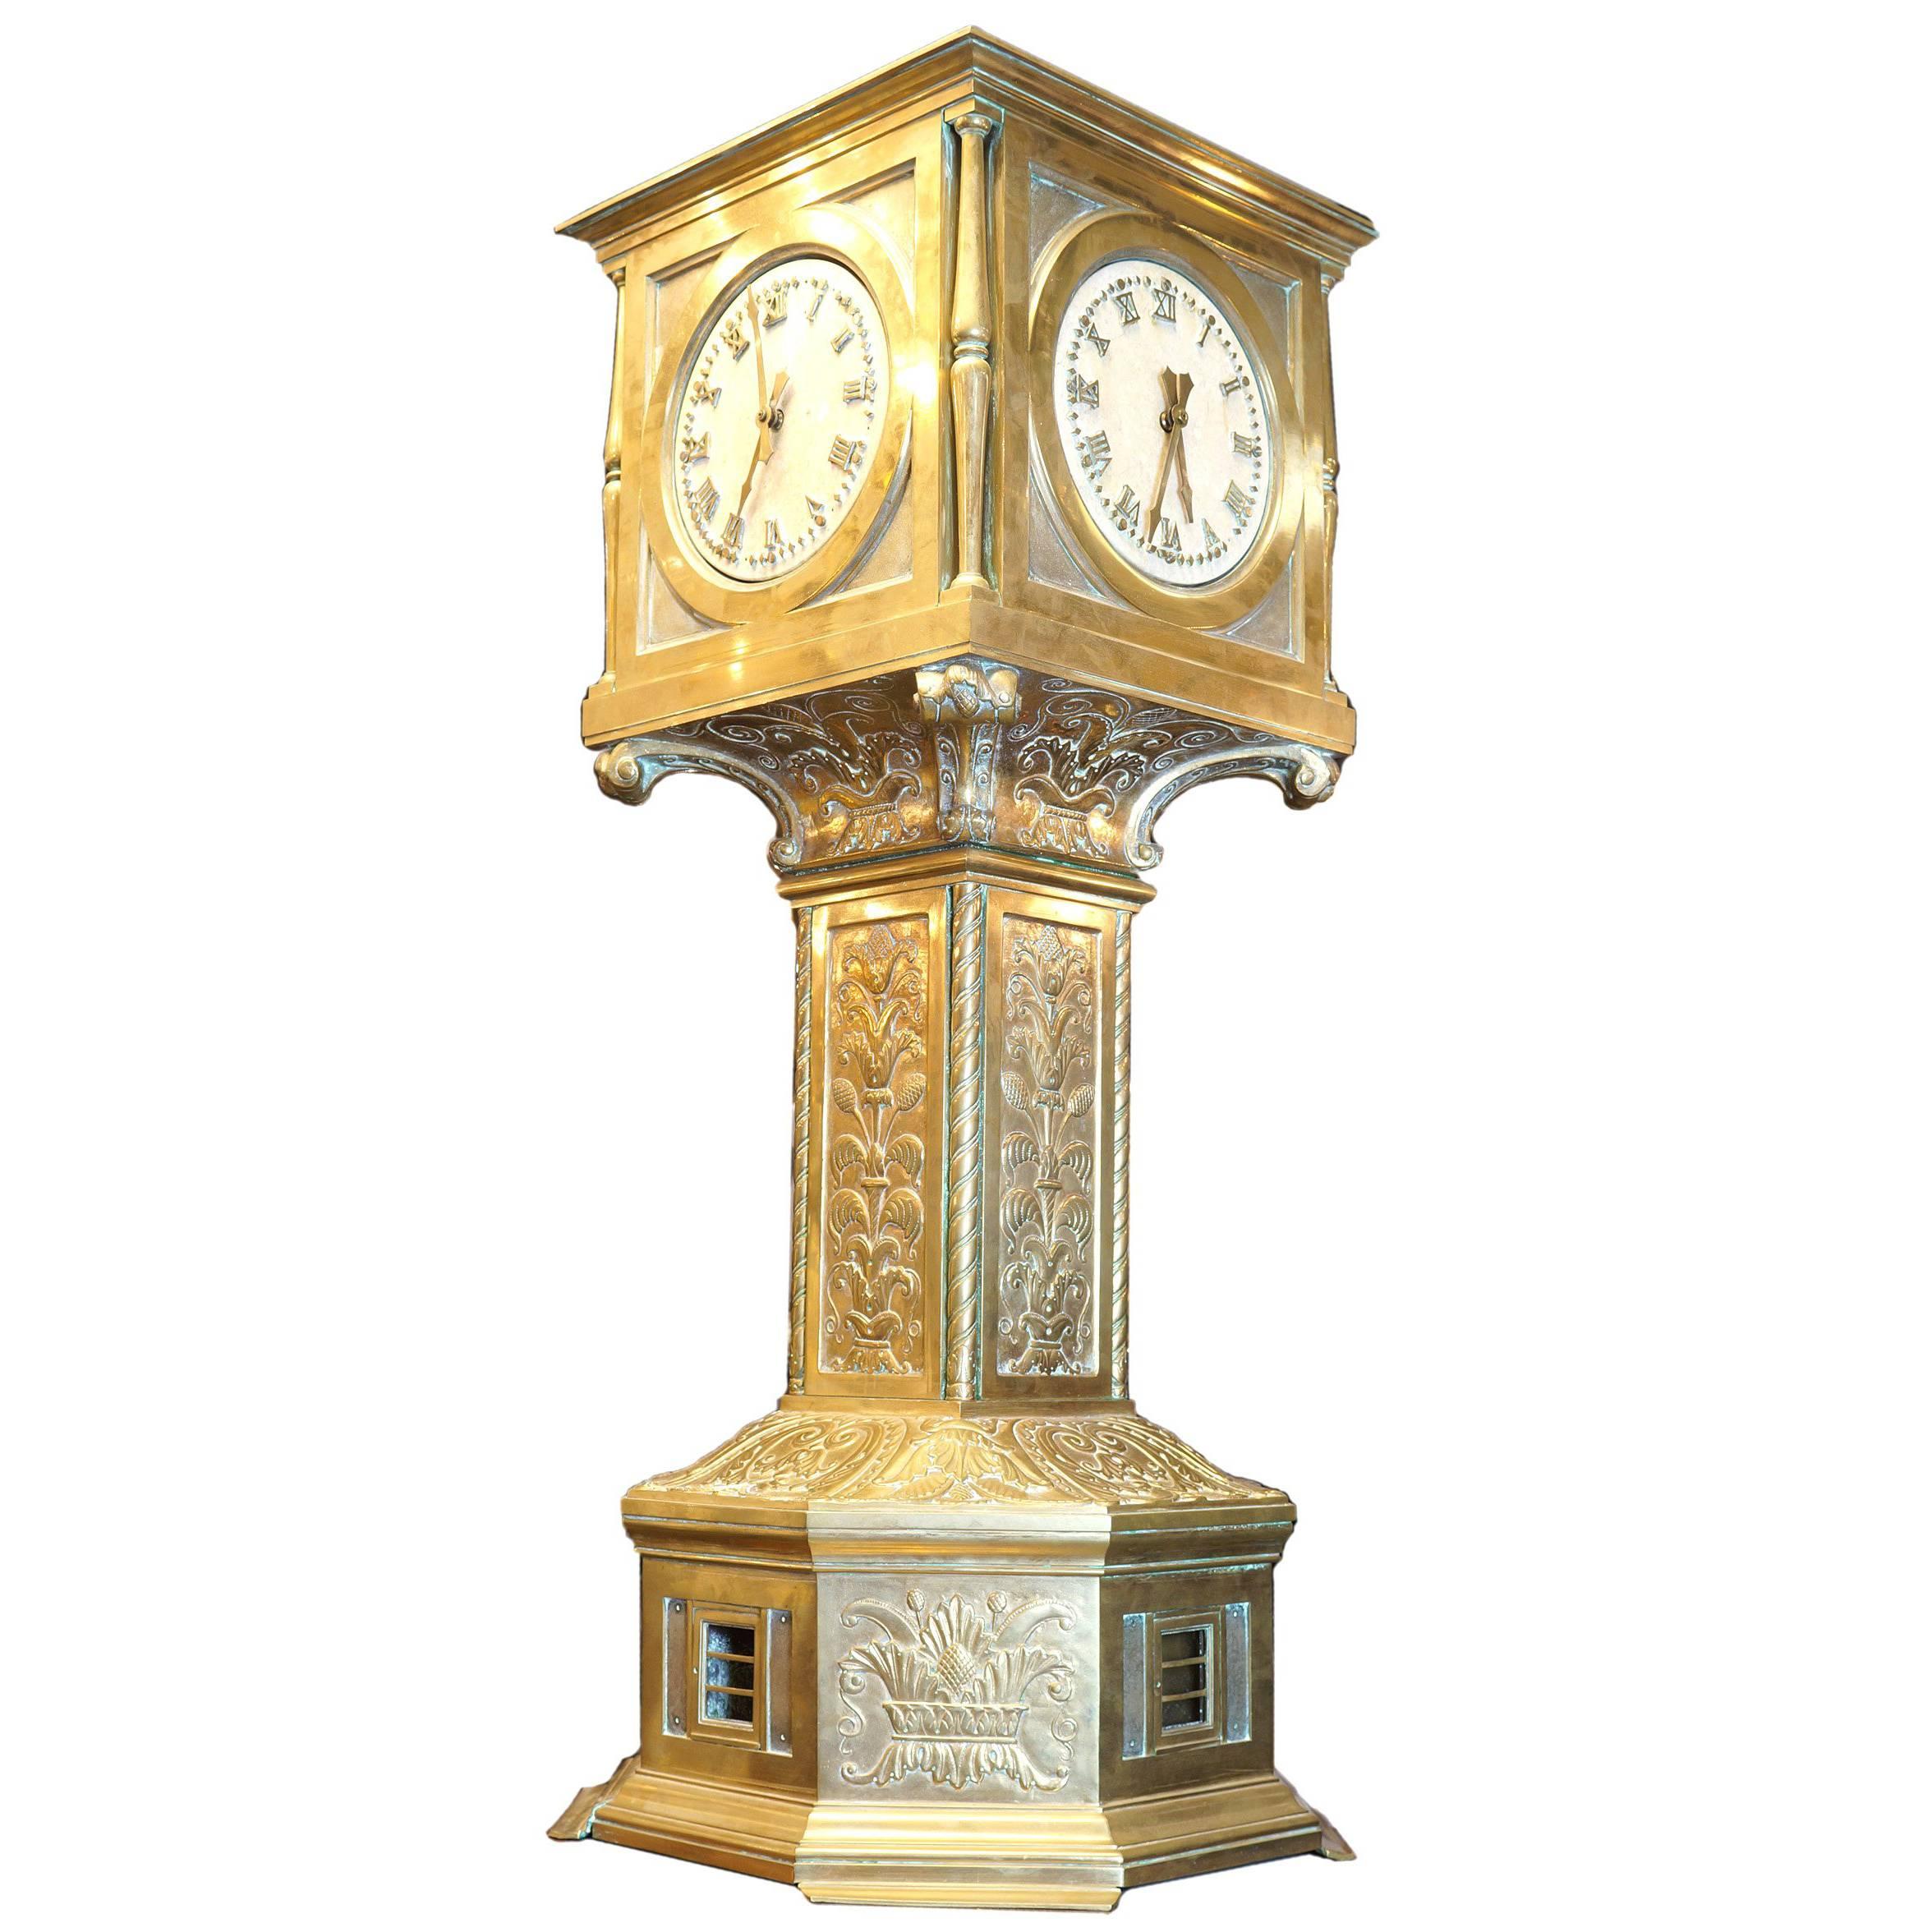 Important Art Deco Period Tall Bronze Clock with Four Time Zones